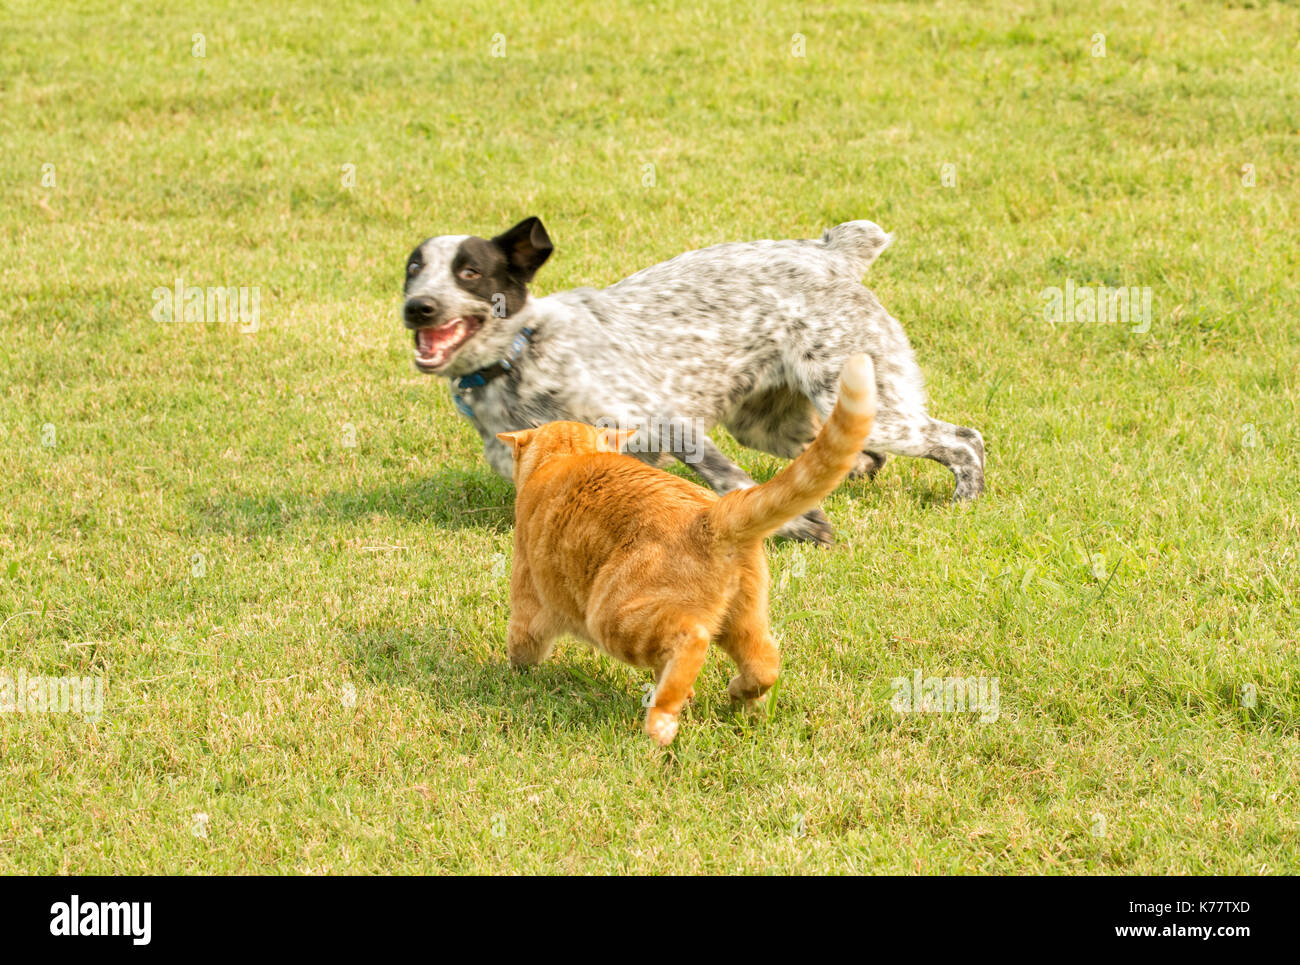 Orange tabby cat doing a threatening gesture to a black and white spotted dog Stock Photo